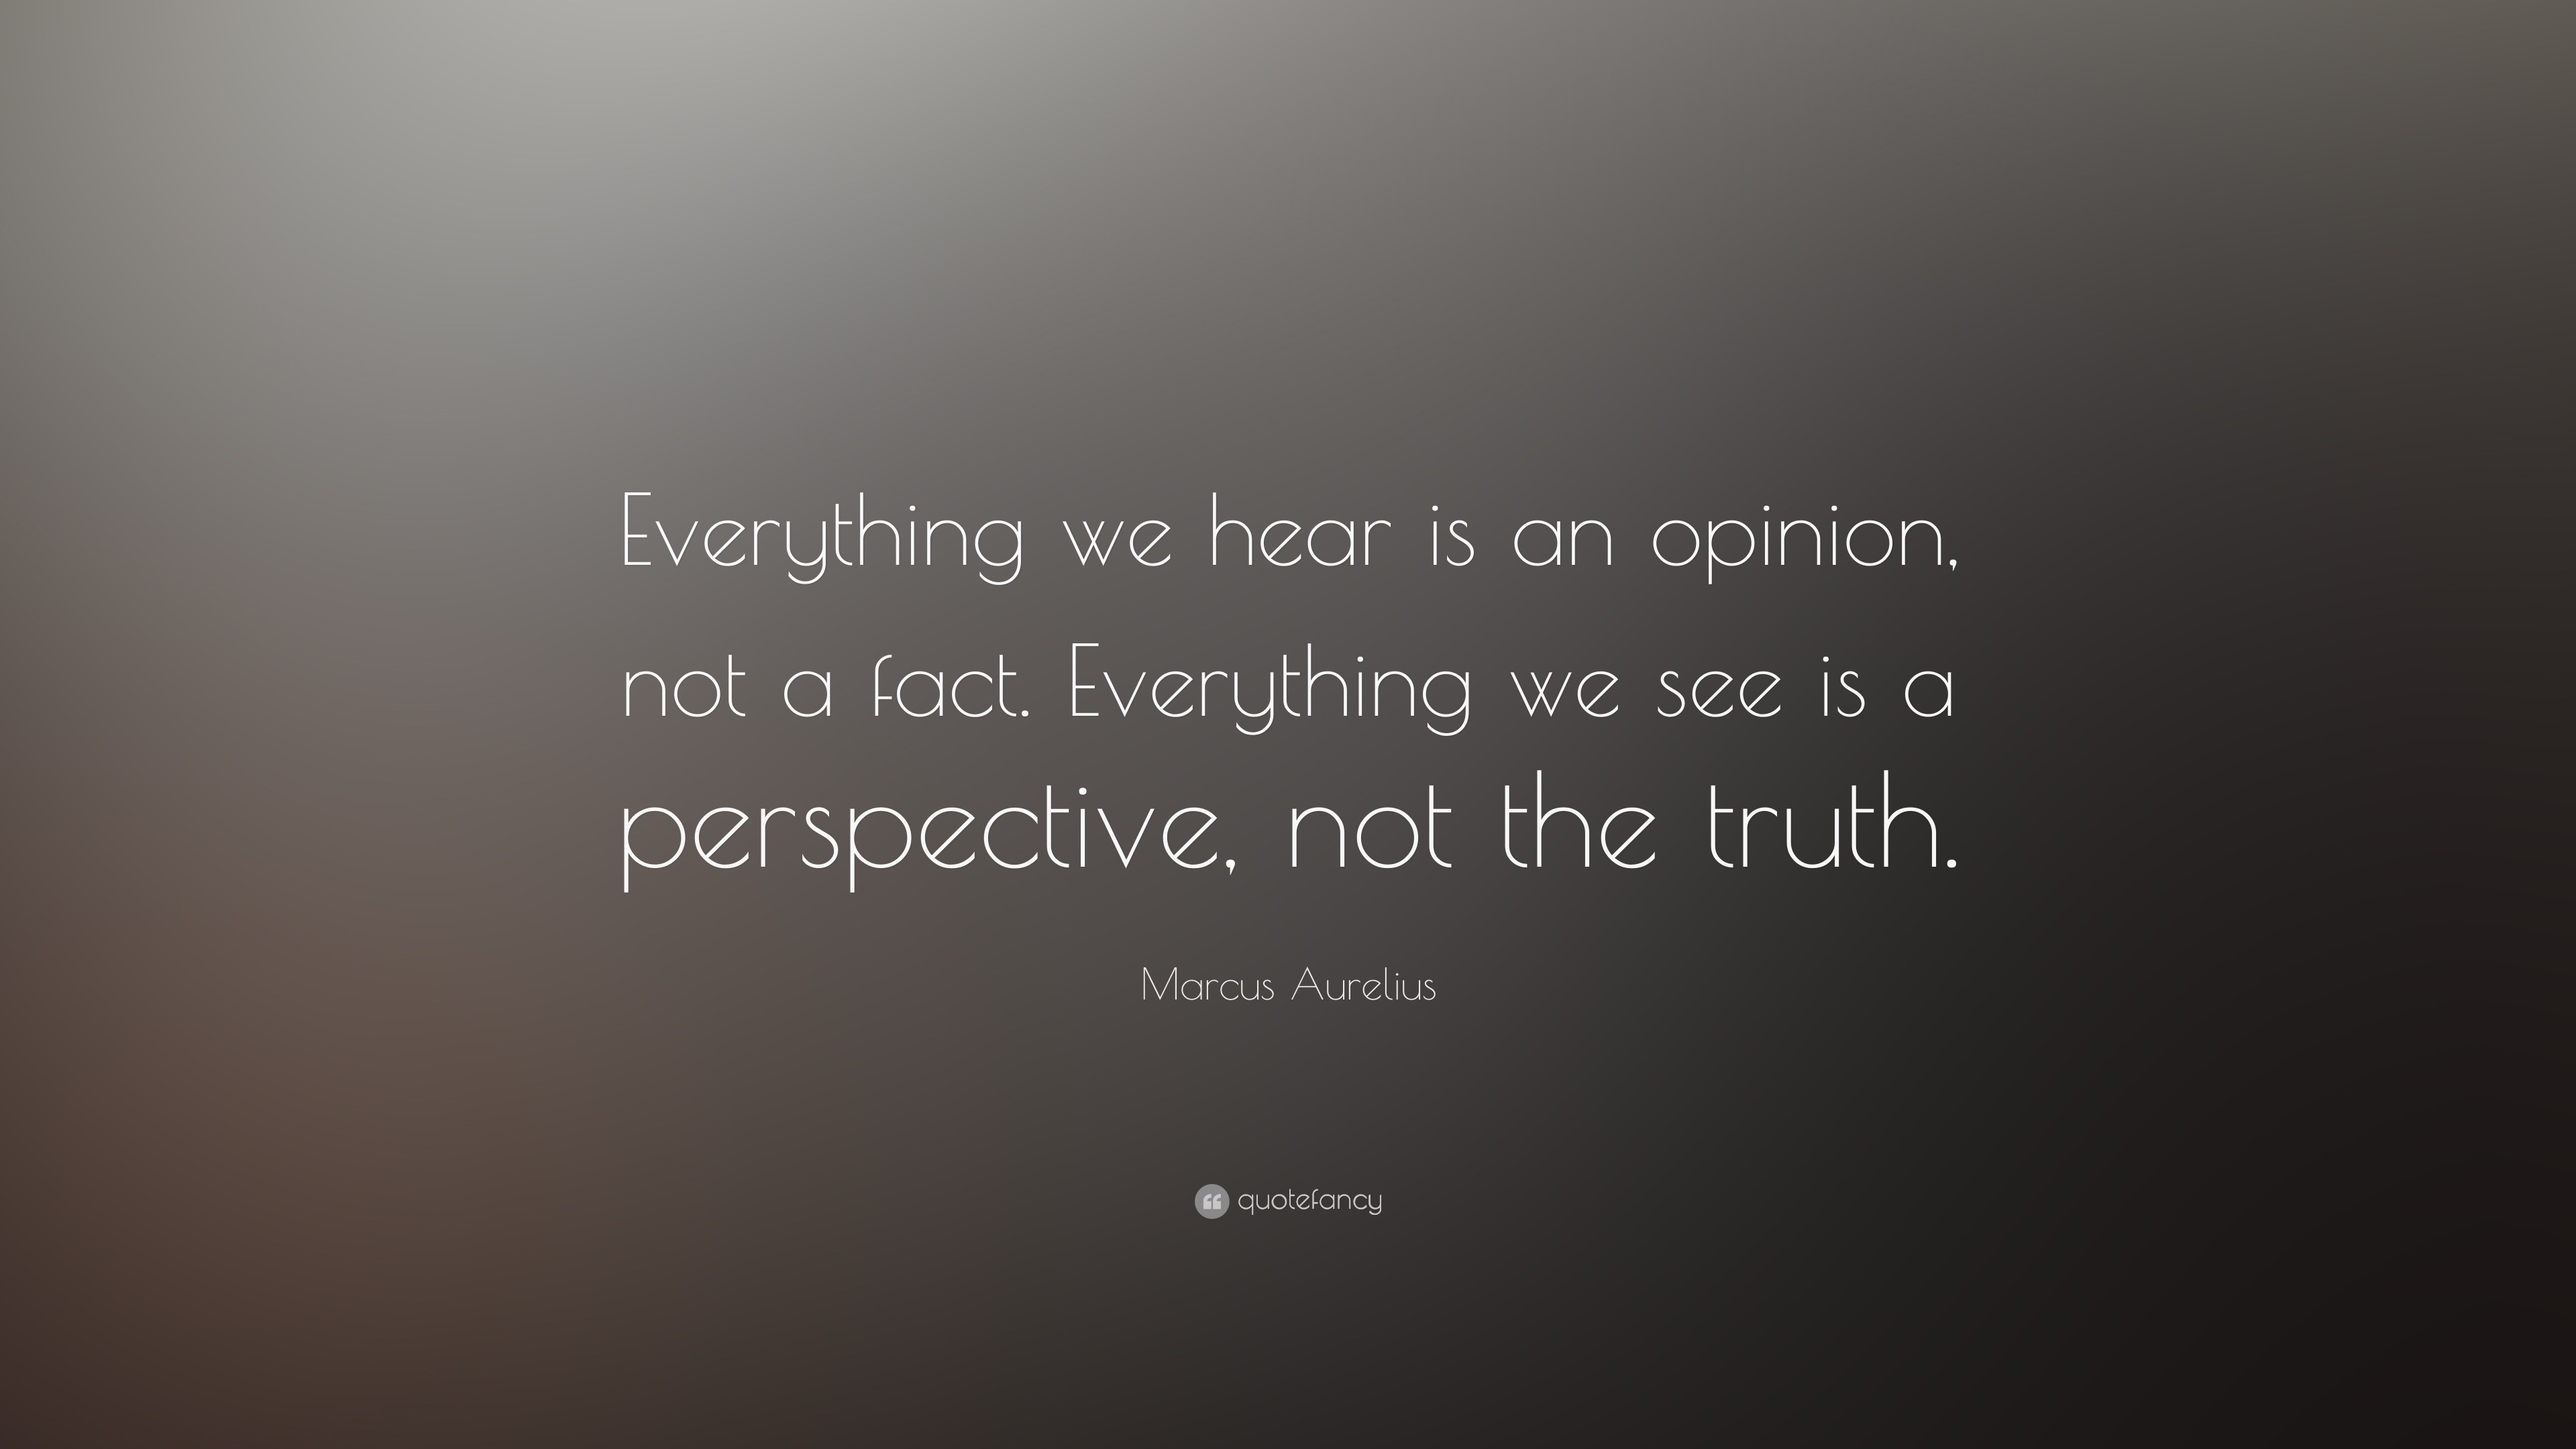 Marcus Aurelius Quote: "Everything we hear is an opinion ...